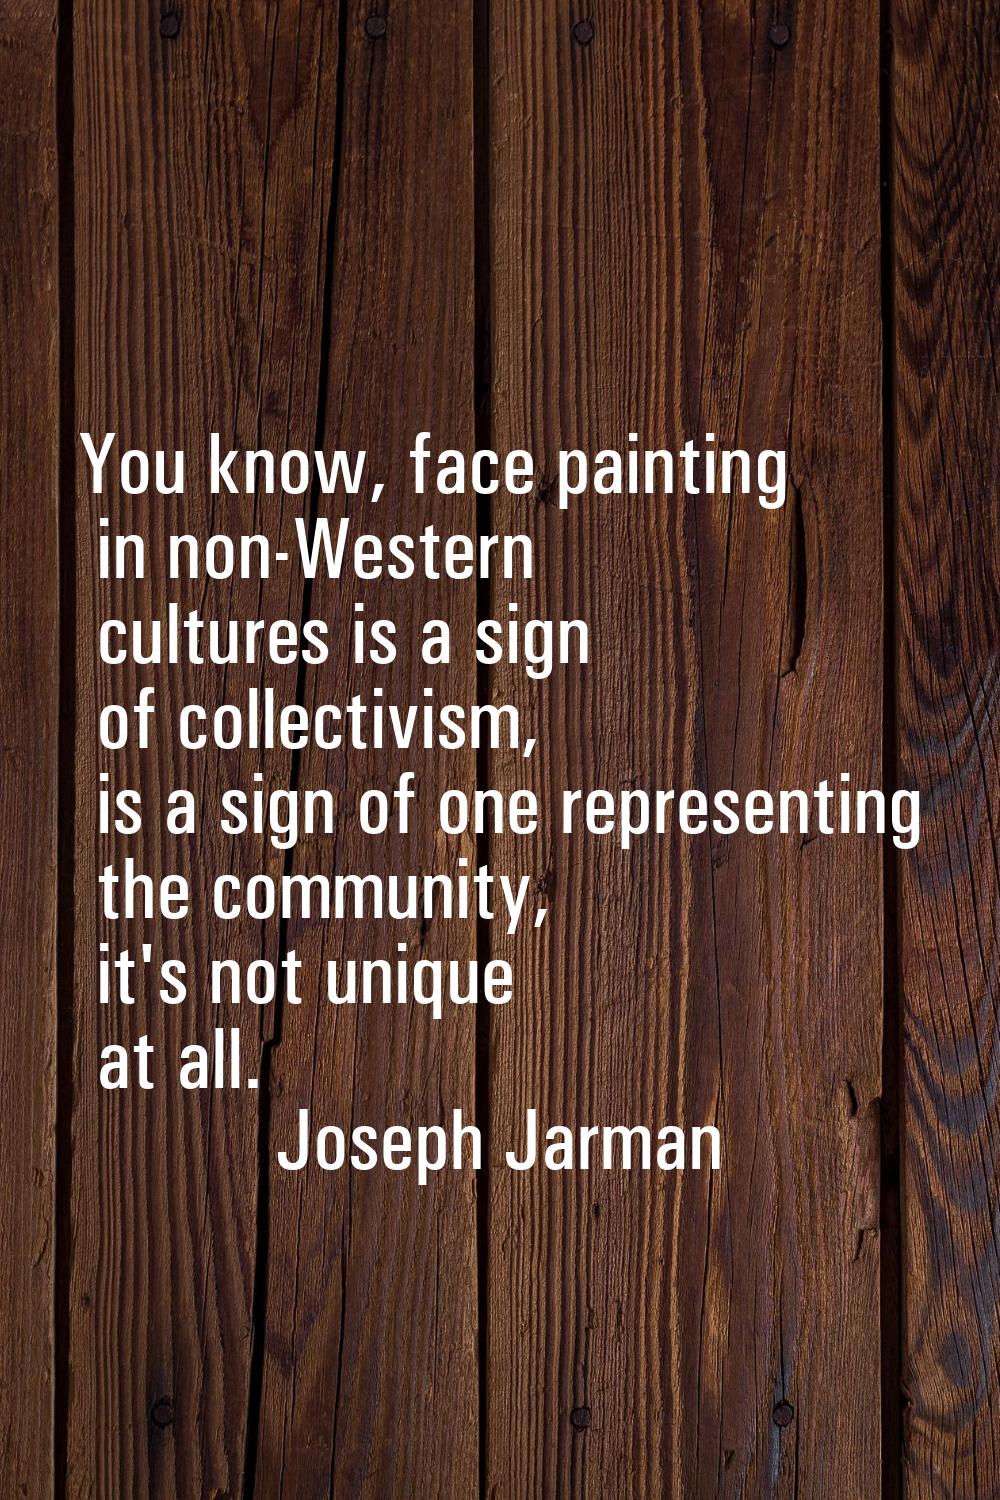 You know, face painting in non-Western cultures is a sign of collectivism, is a sign of one represe